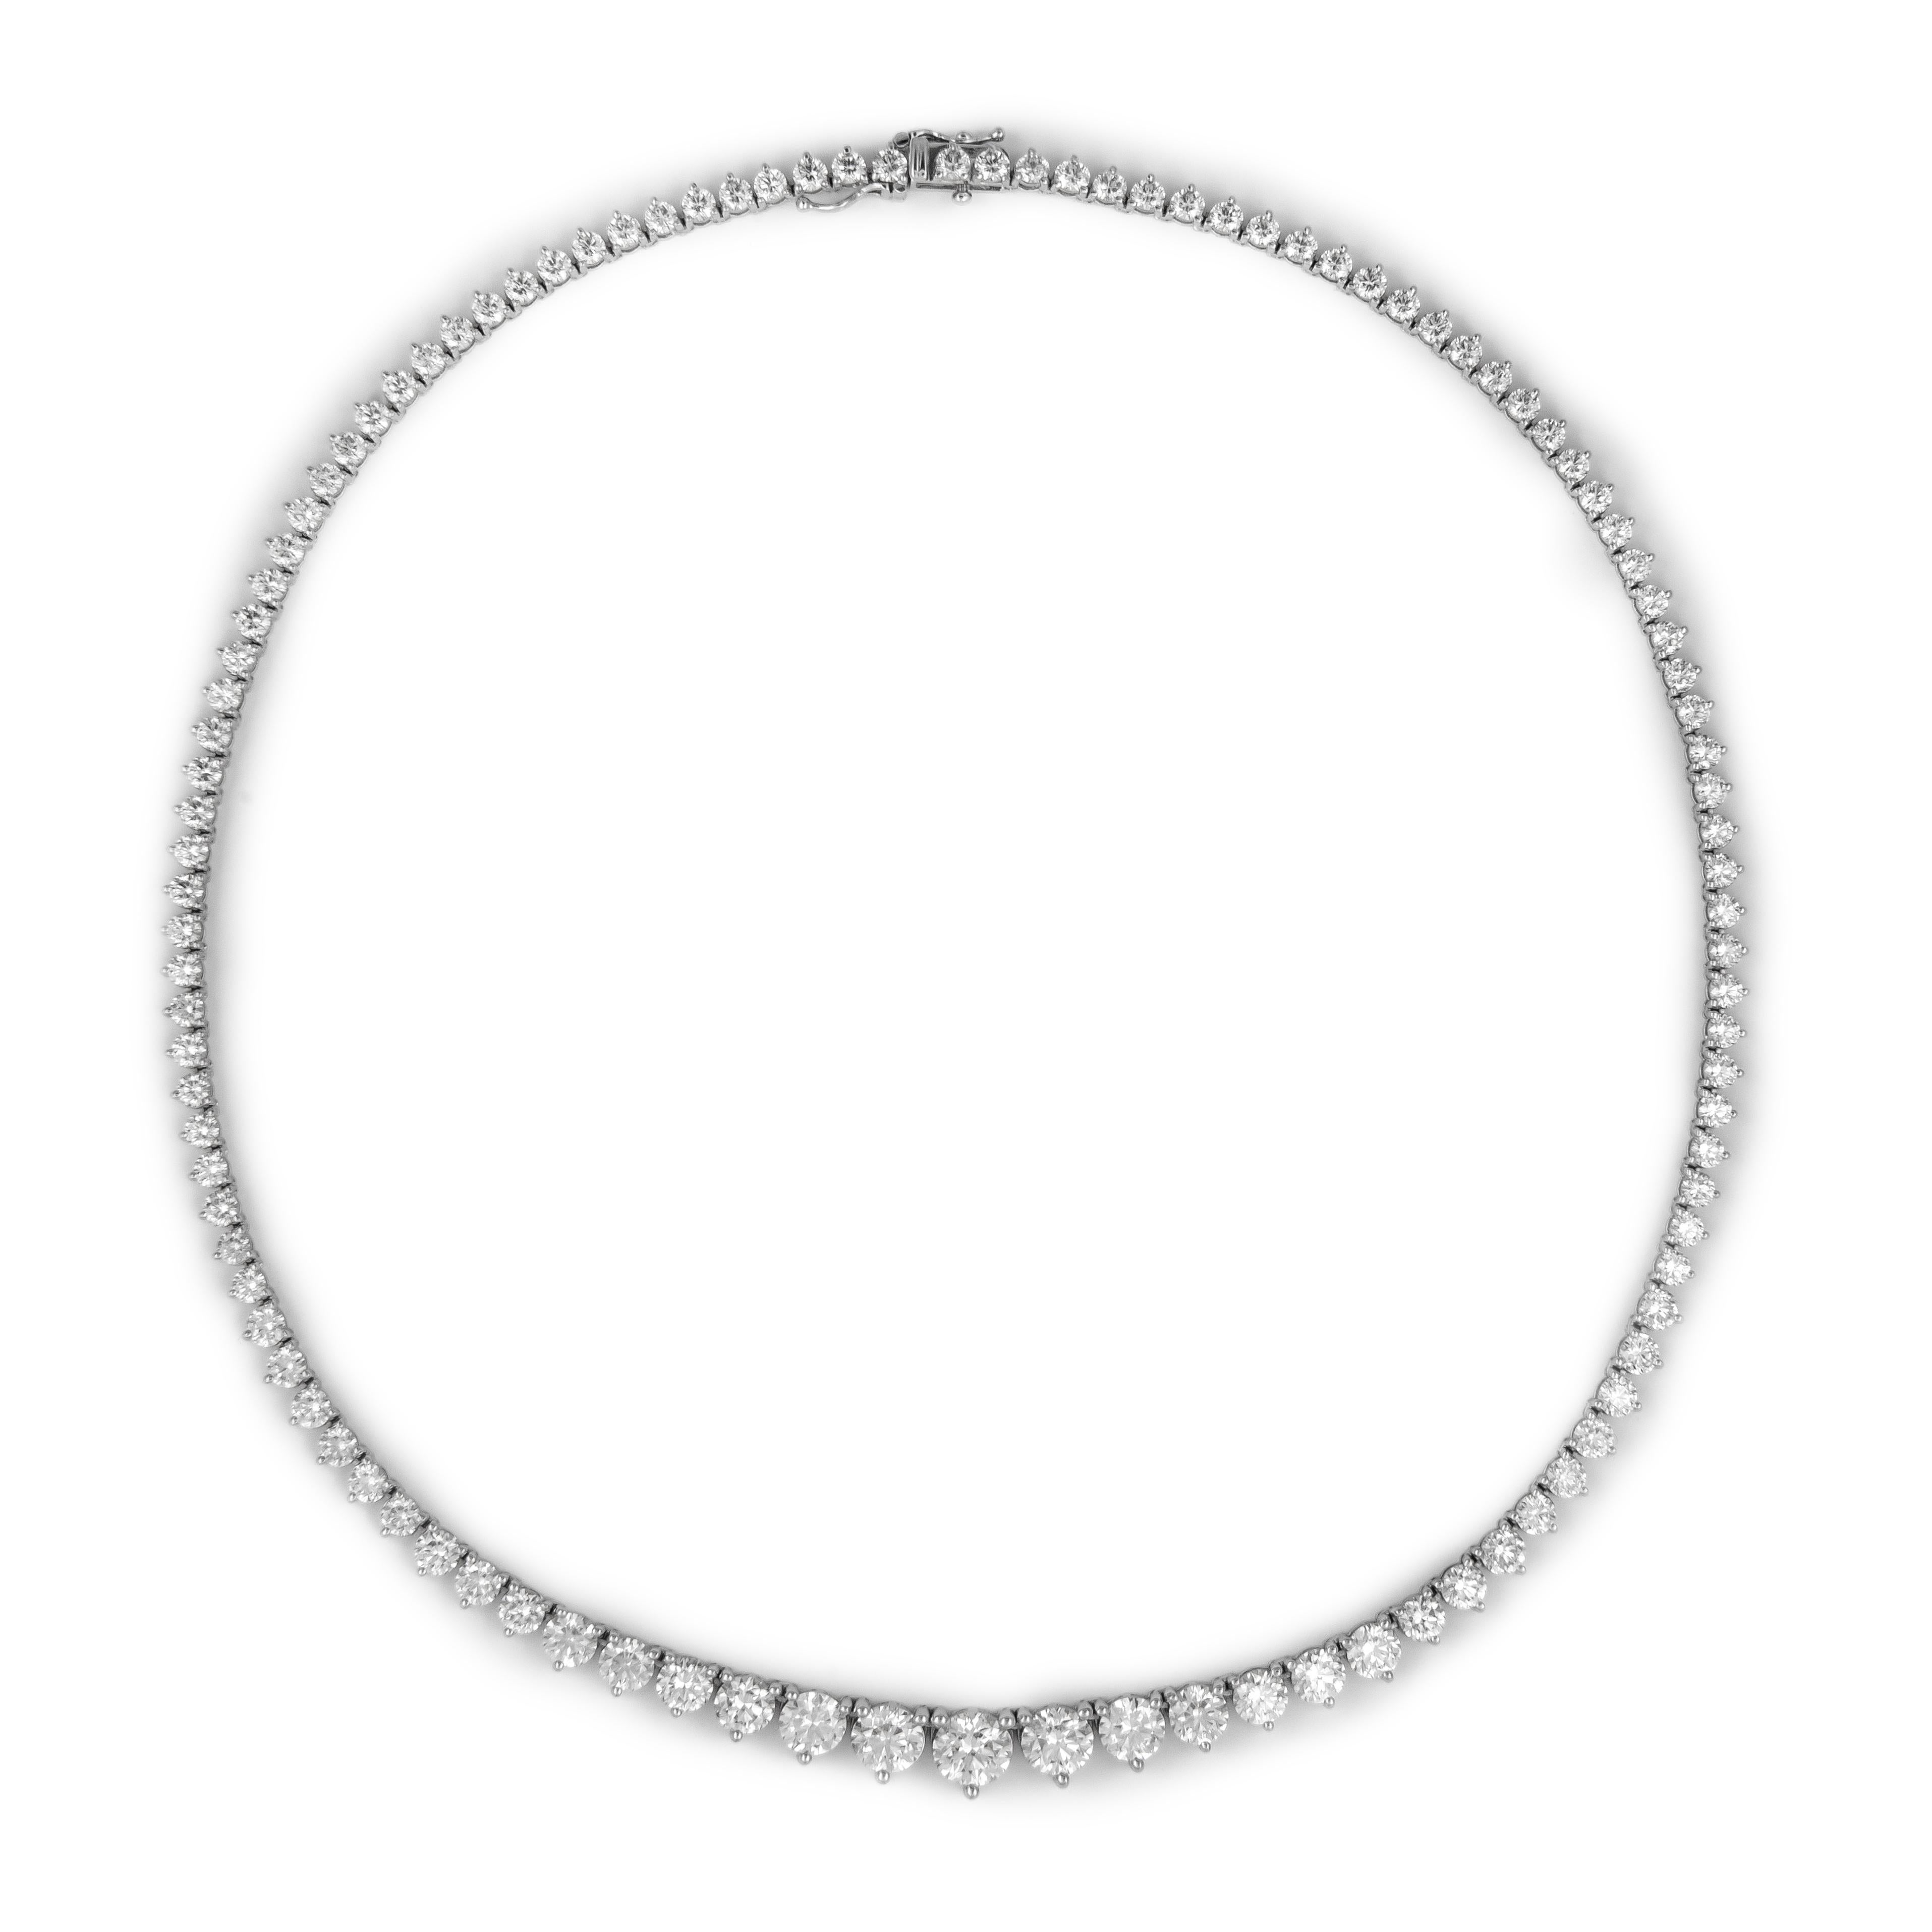 Beautiful and classic diamond tennis riviera necklace with two GIA certificates. High jewelry by Alexander Beverly Hills.
18.58 carats total diamond weight. 
Center 1.02ct round brilliant diamond, I color VS2 clarity, GIA certified. 17.56 carats of